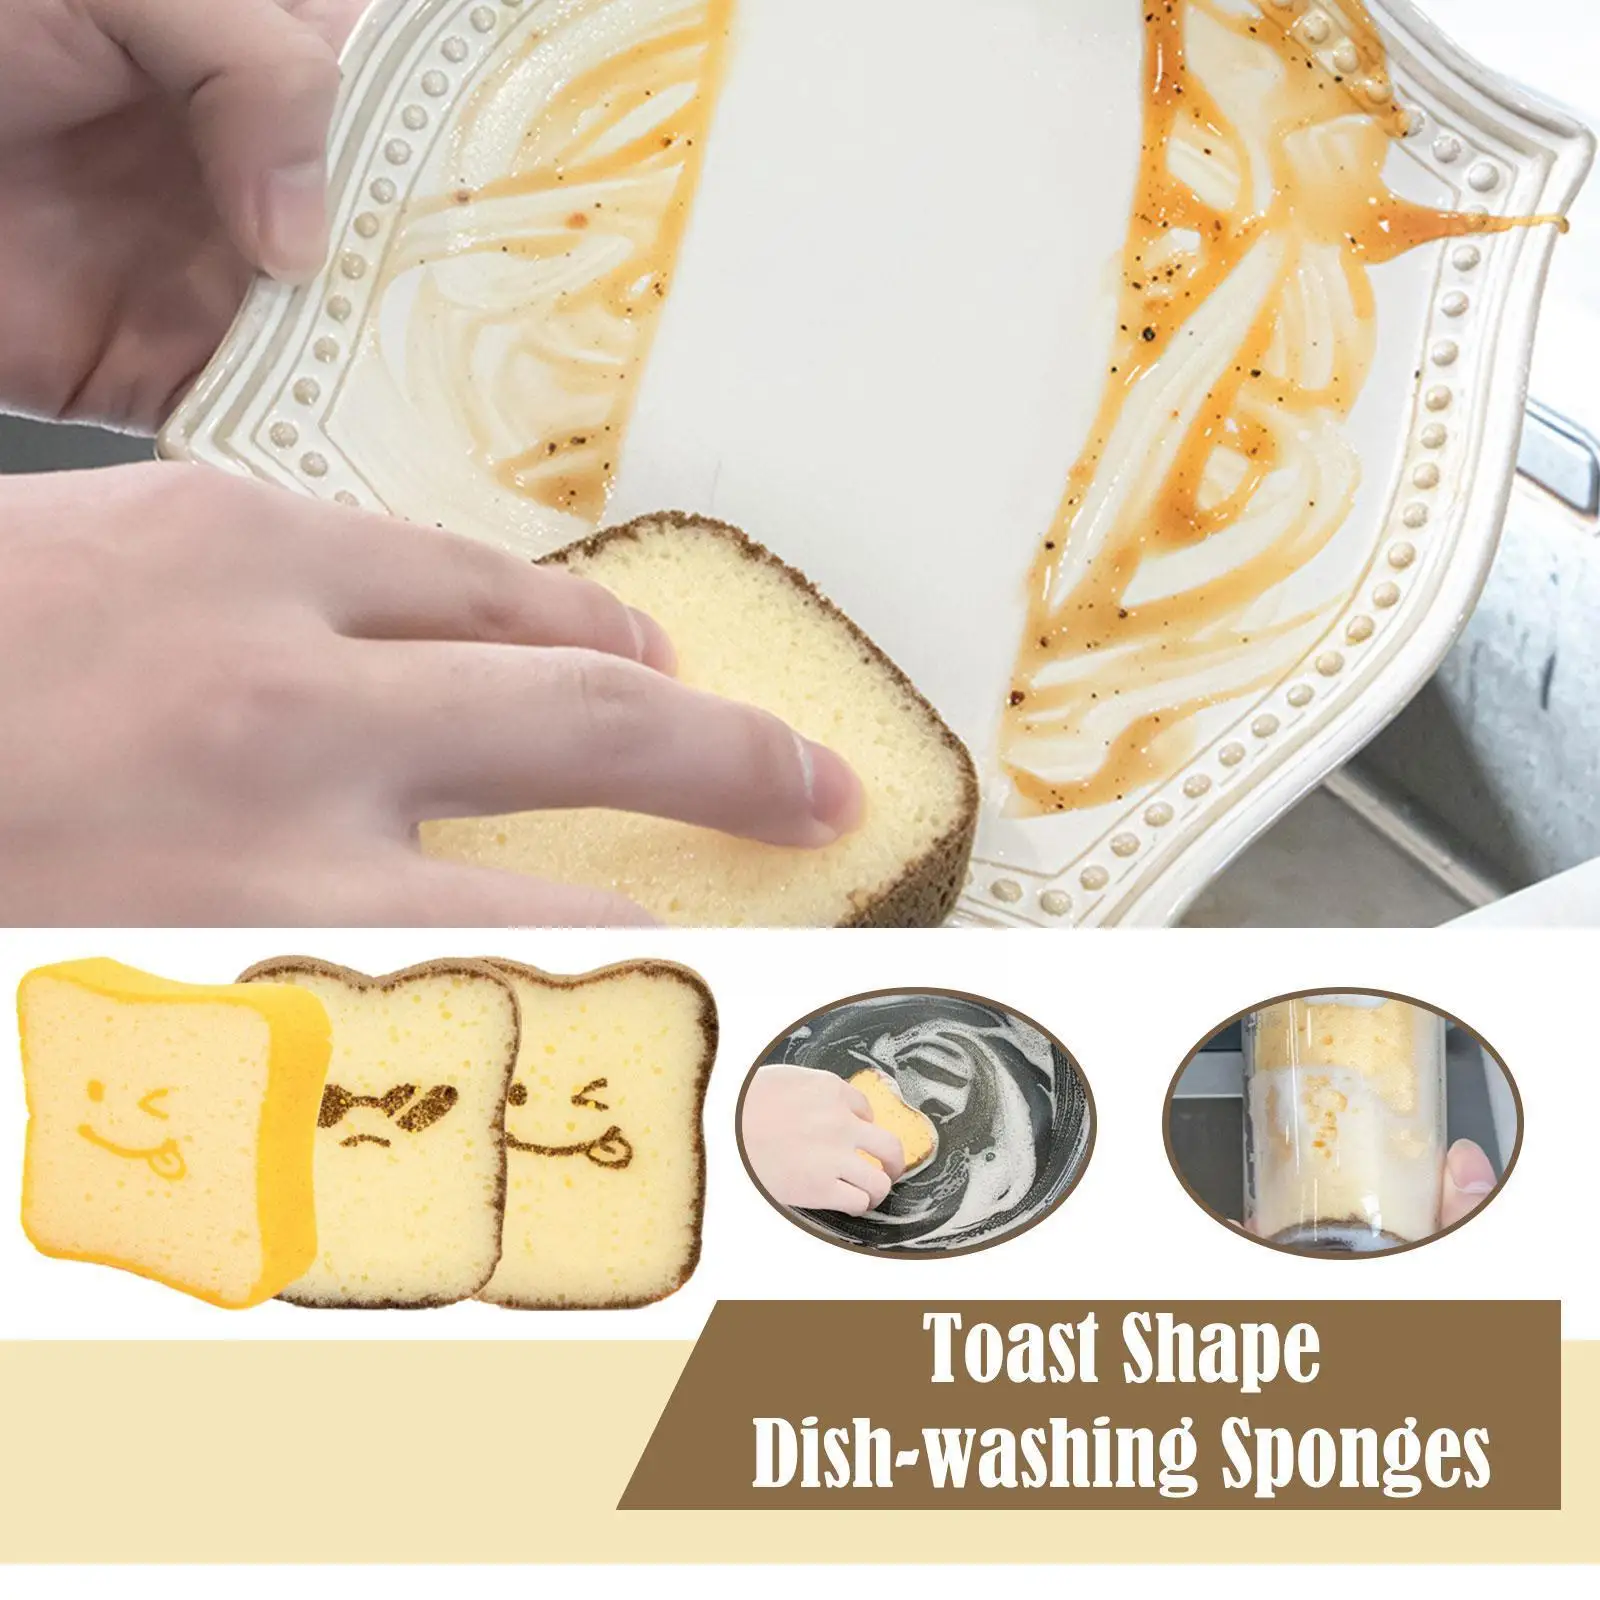 

Creative Toast Shape Dishwashing Sponges Washable Scouring Tools For Pots Dishes Kitchen Accessories Household Cleaning Gad J8N7